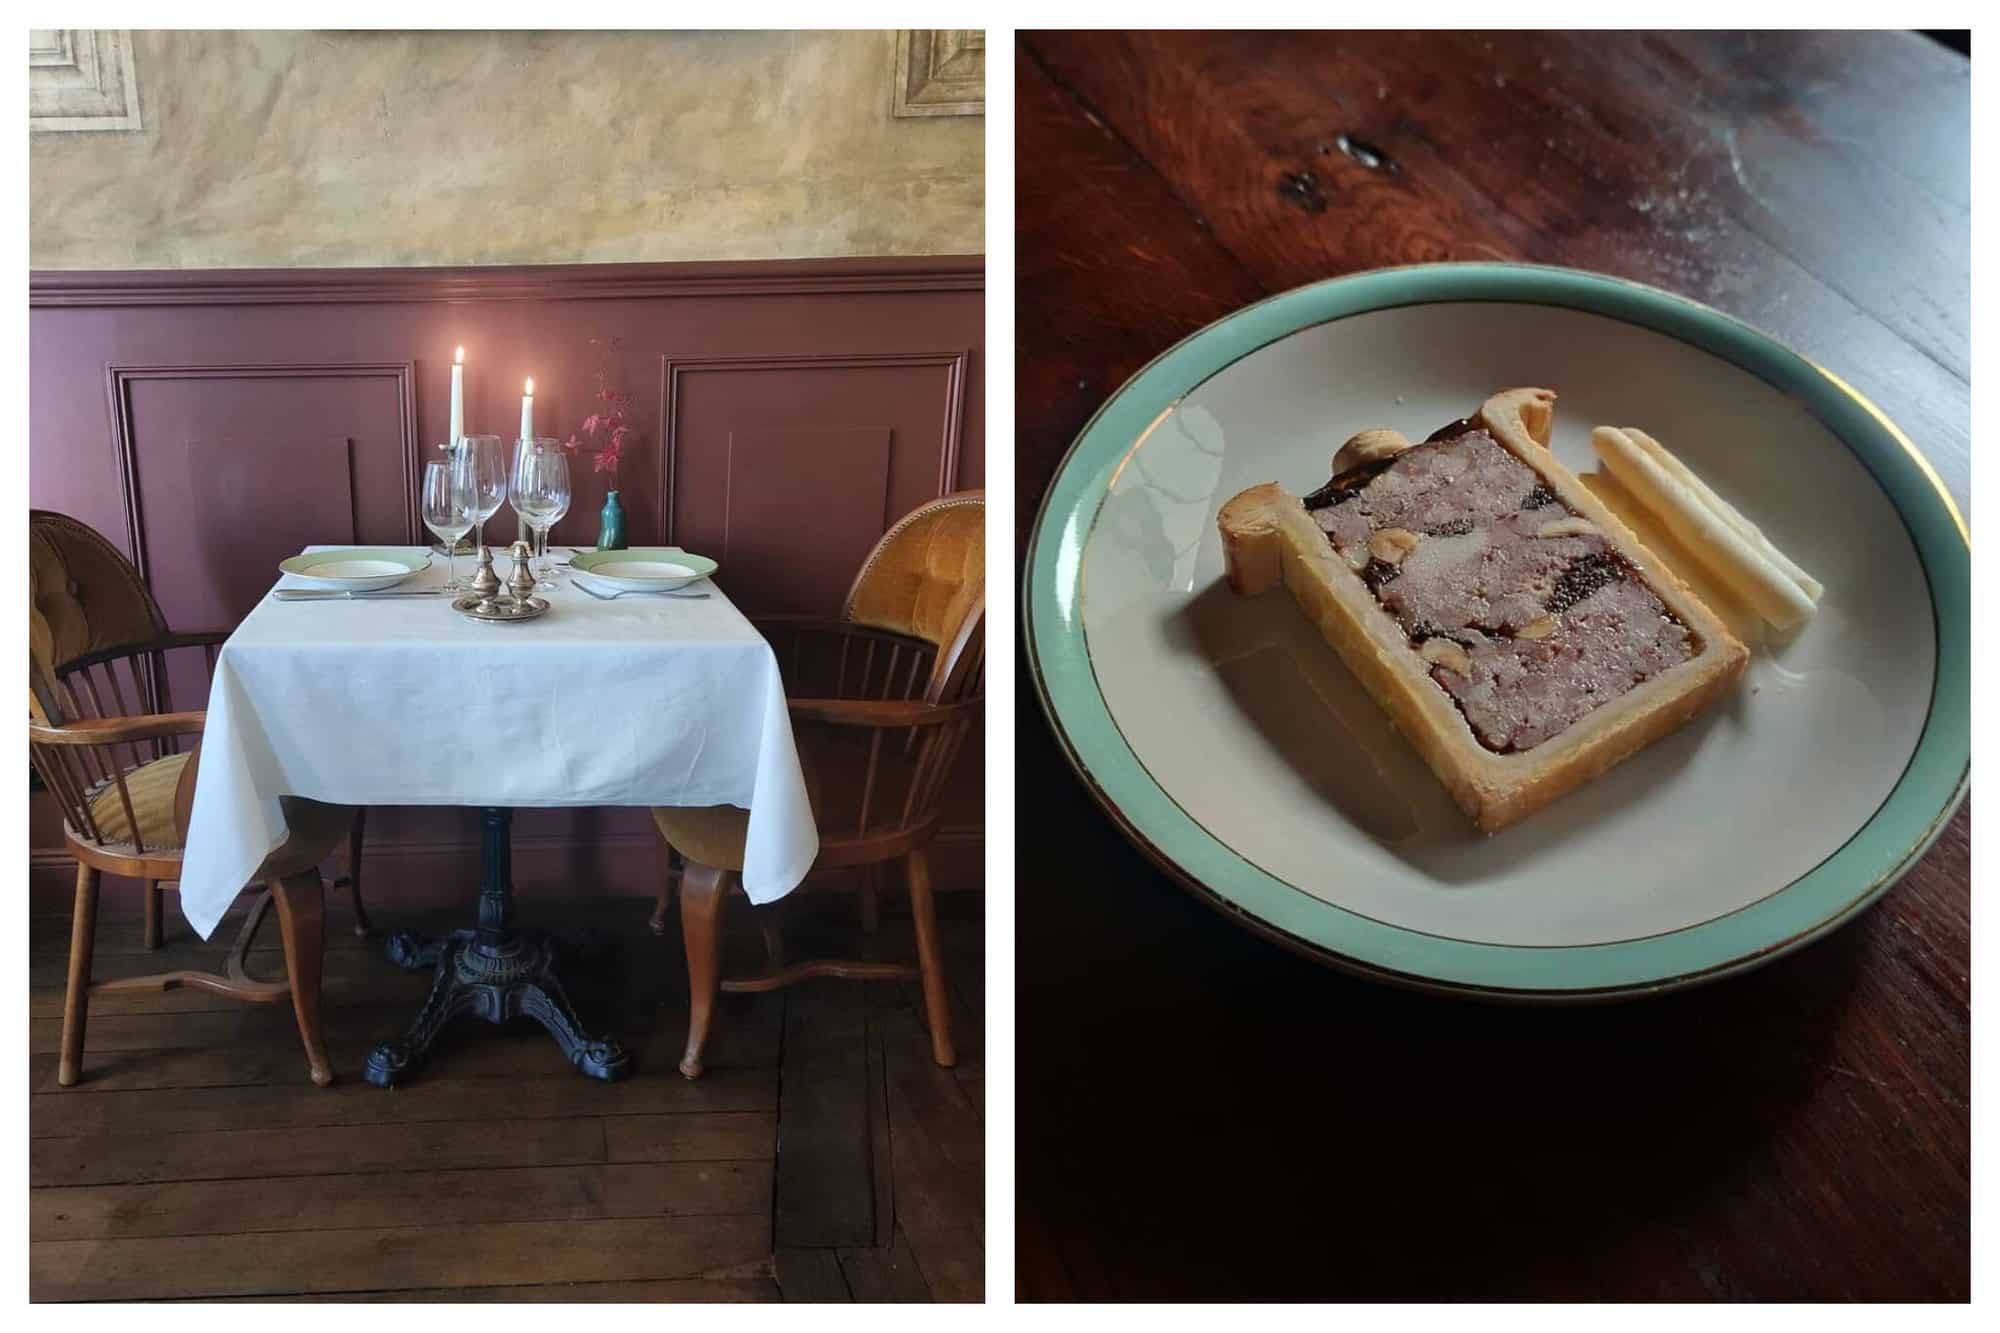 Two pictures from the Parisian restaurant "Pétrelle". On the left is a candle-lit table for two. On the right is a special slice of the french 'pâté'.